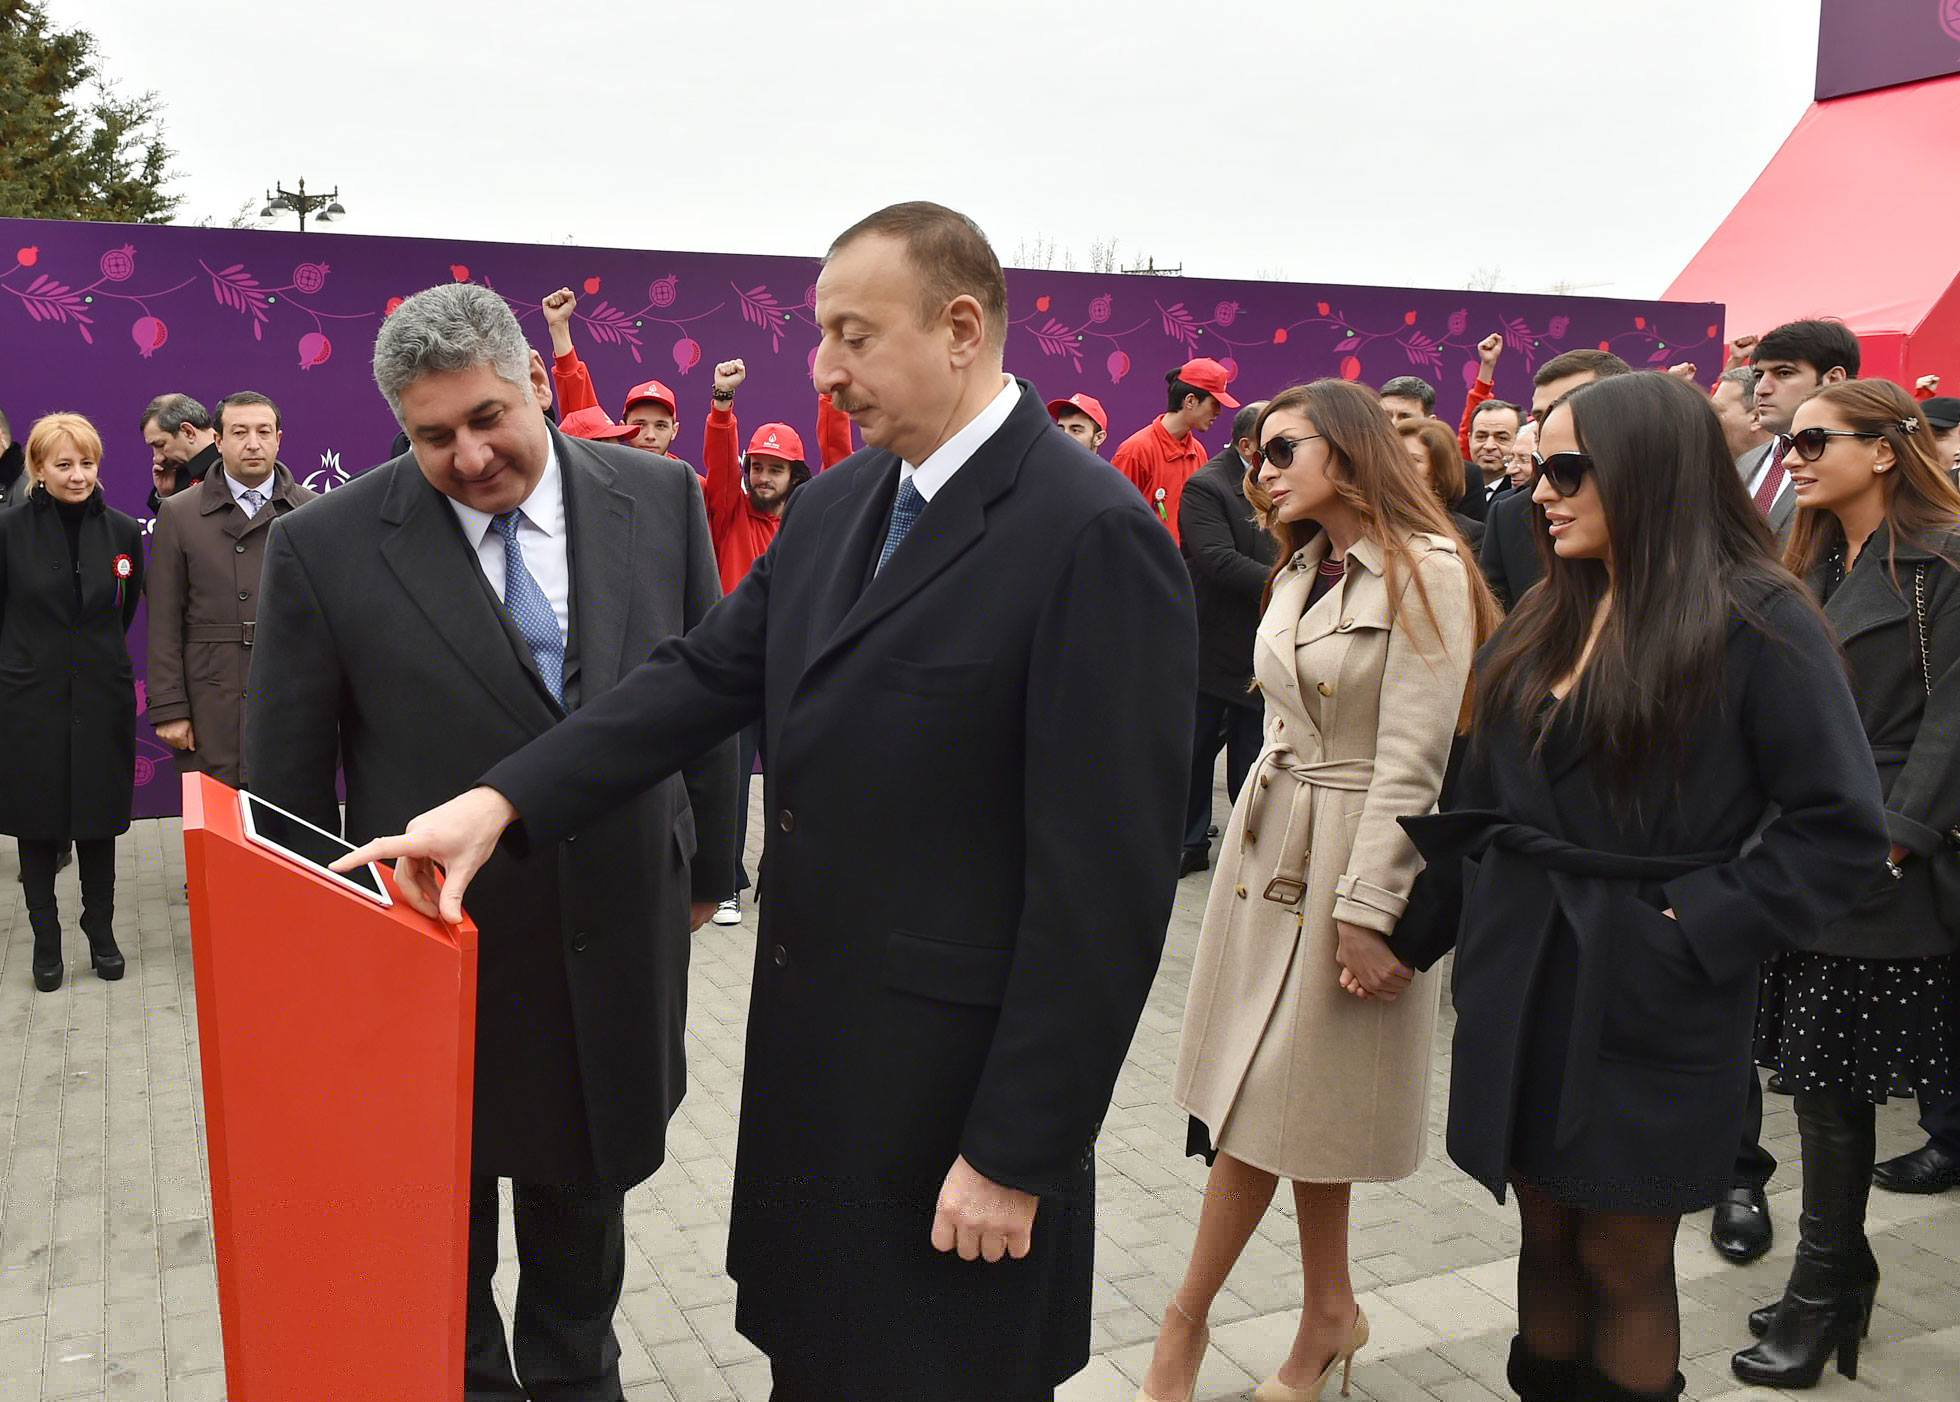 Azerbaijan President Ilham Aliyev took part in a ceremonial purchase of the first ticket for Baku 2015 during the Novruz celebrations ©Baku 2015